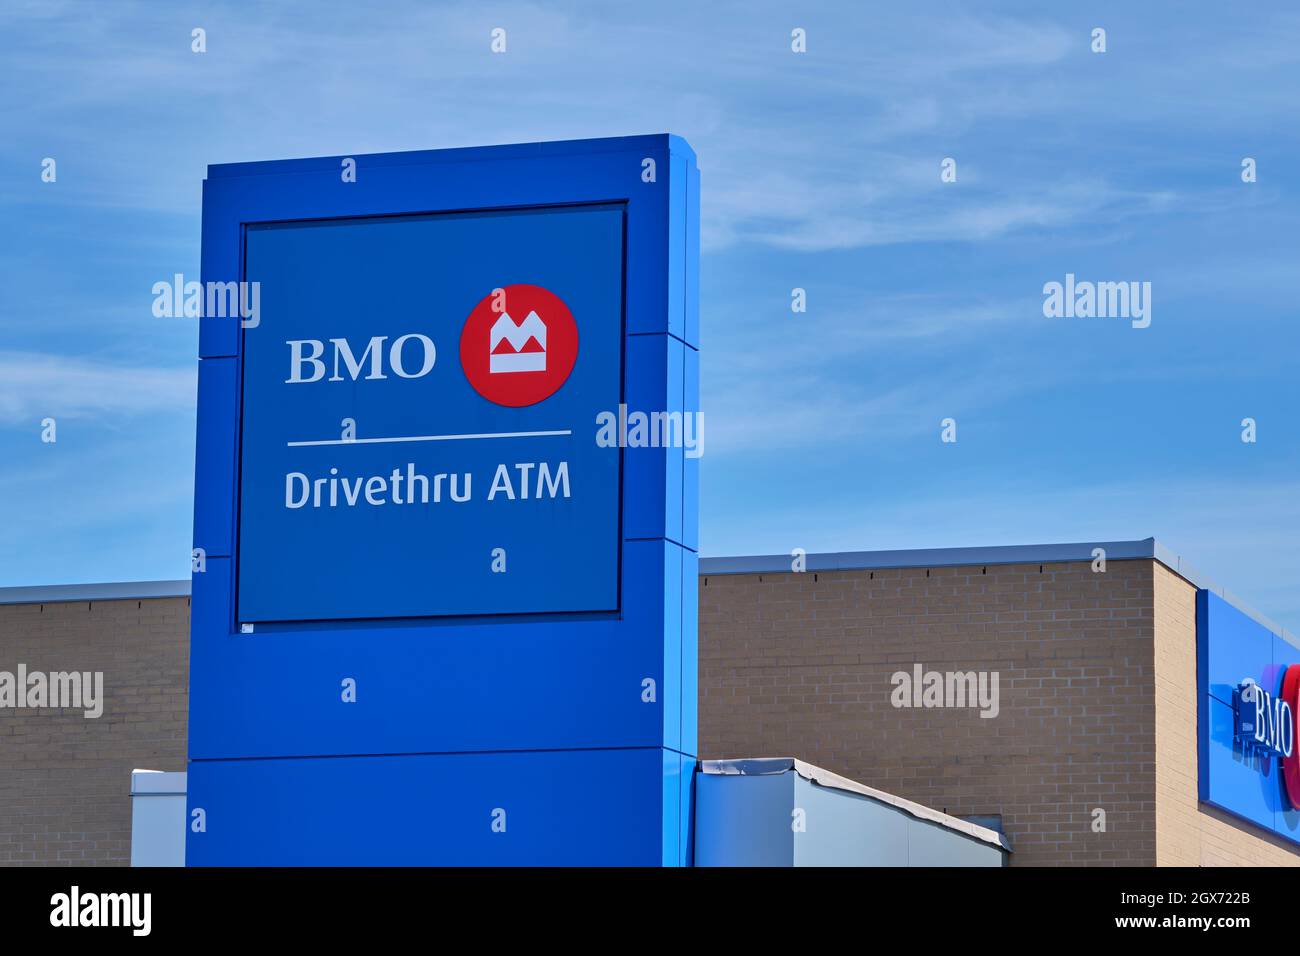 The Bank of Montreal or BMO is one of the major charted banks in Canada. Stock Photo